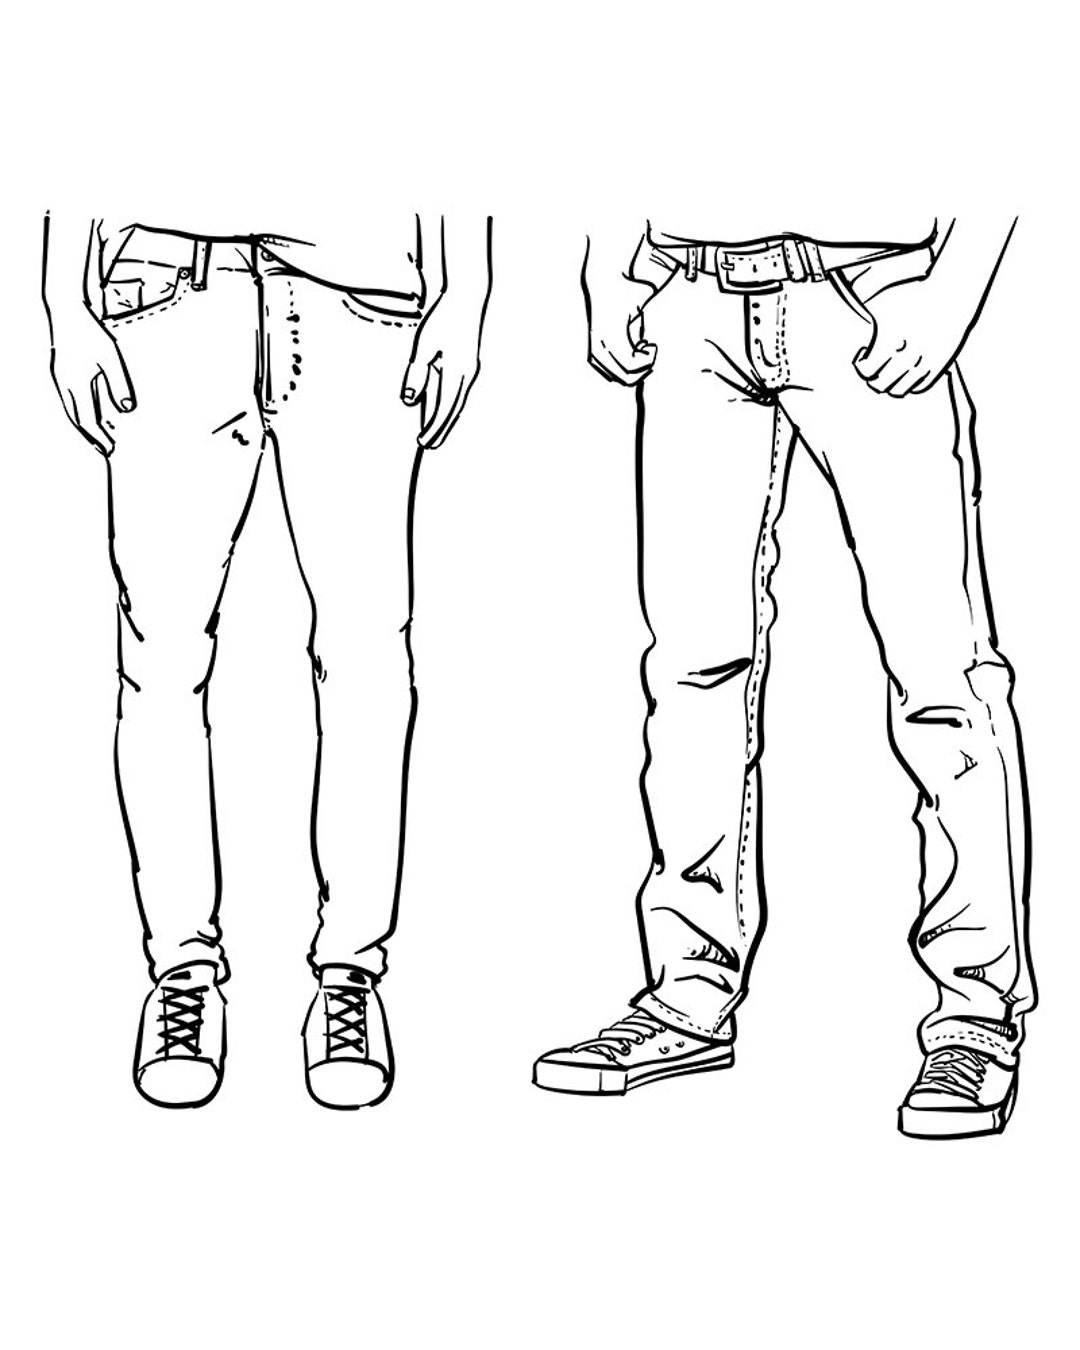 80% off Sale Hand Drawn Fashion Collection of Men's Jeans. - Etsy